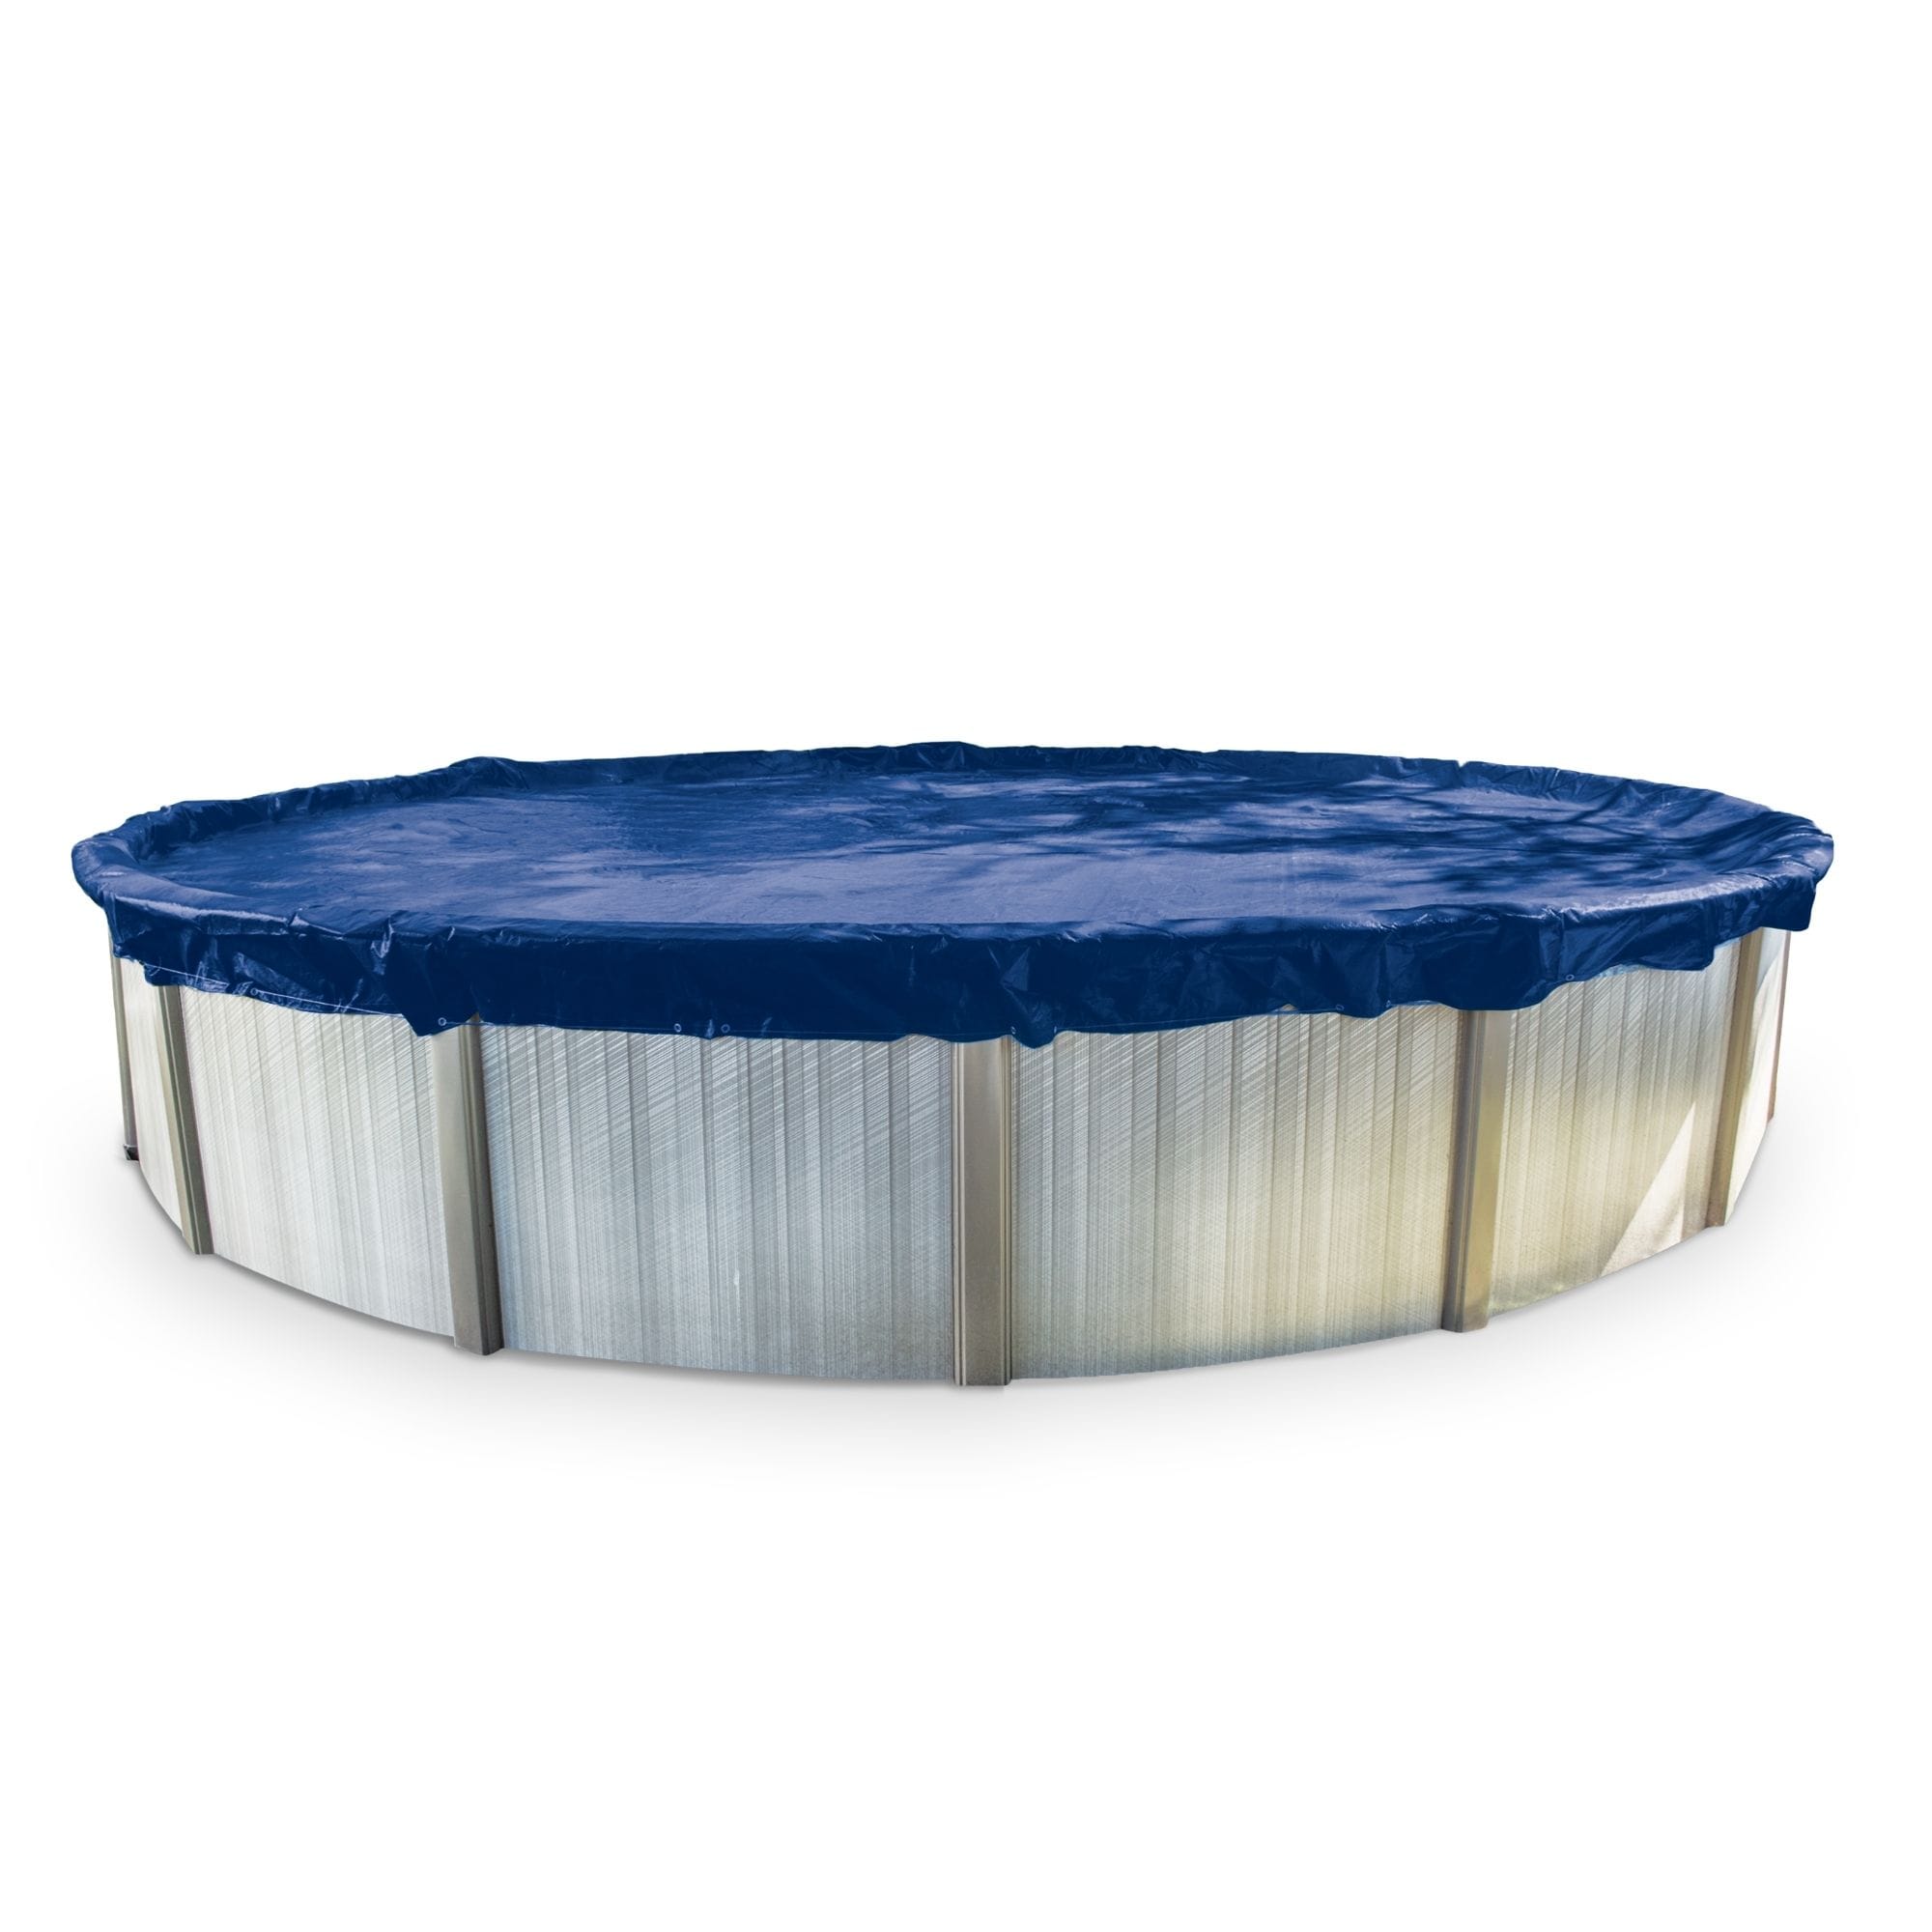 21-FT X 37- FT WINTER COVER FOR 18 X34 FT POOL Pool Covers at